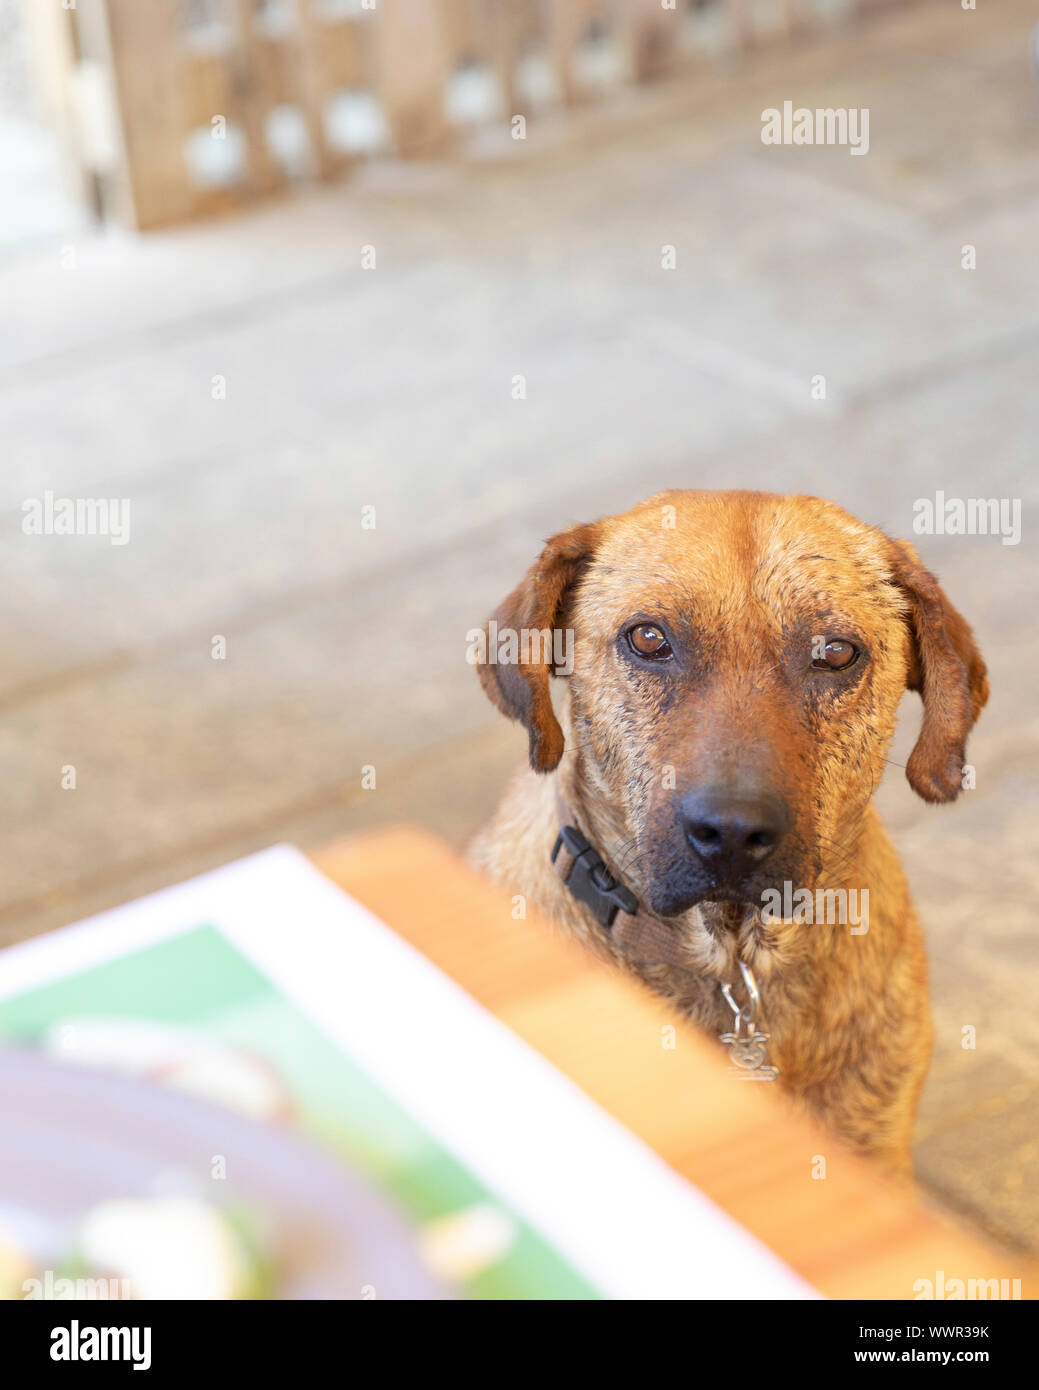 Stray dog begging for food in a restaurant near Cabo San Lucas, Mexico Stock Photo